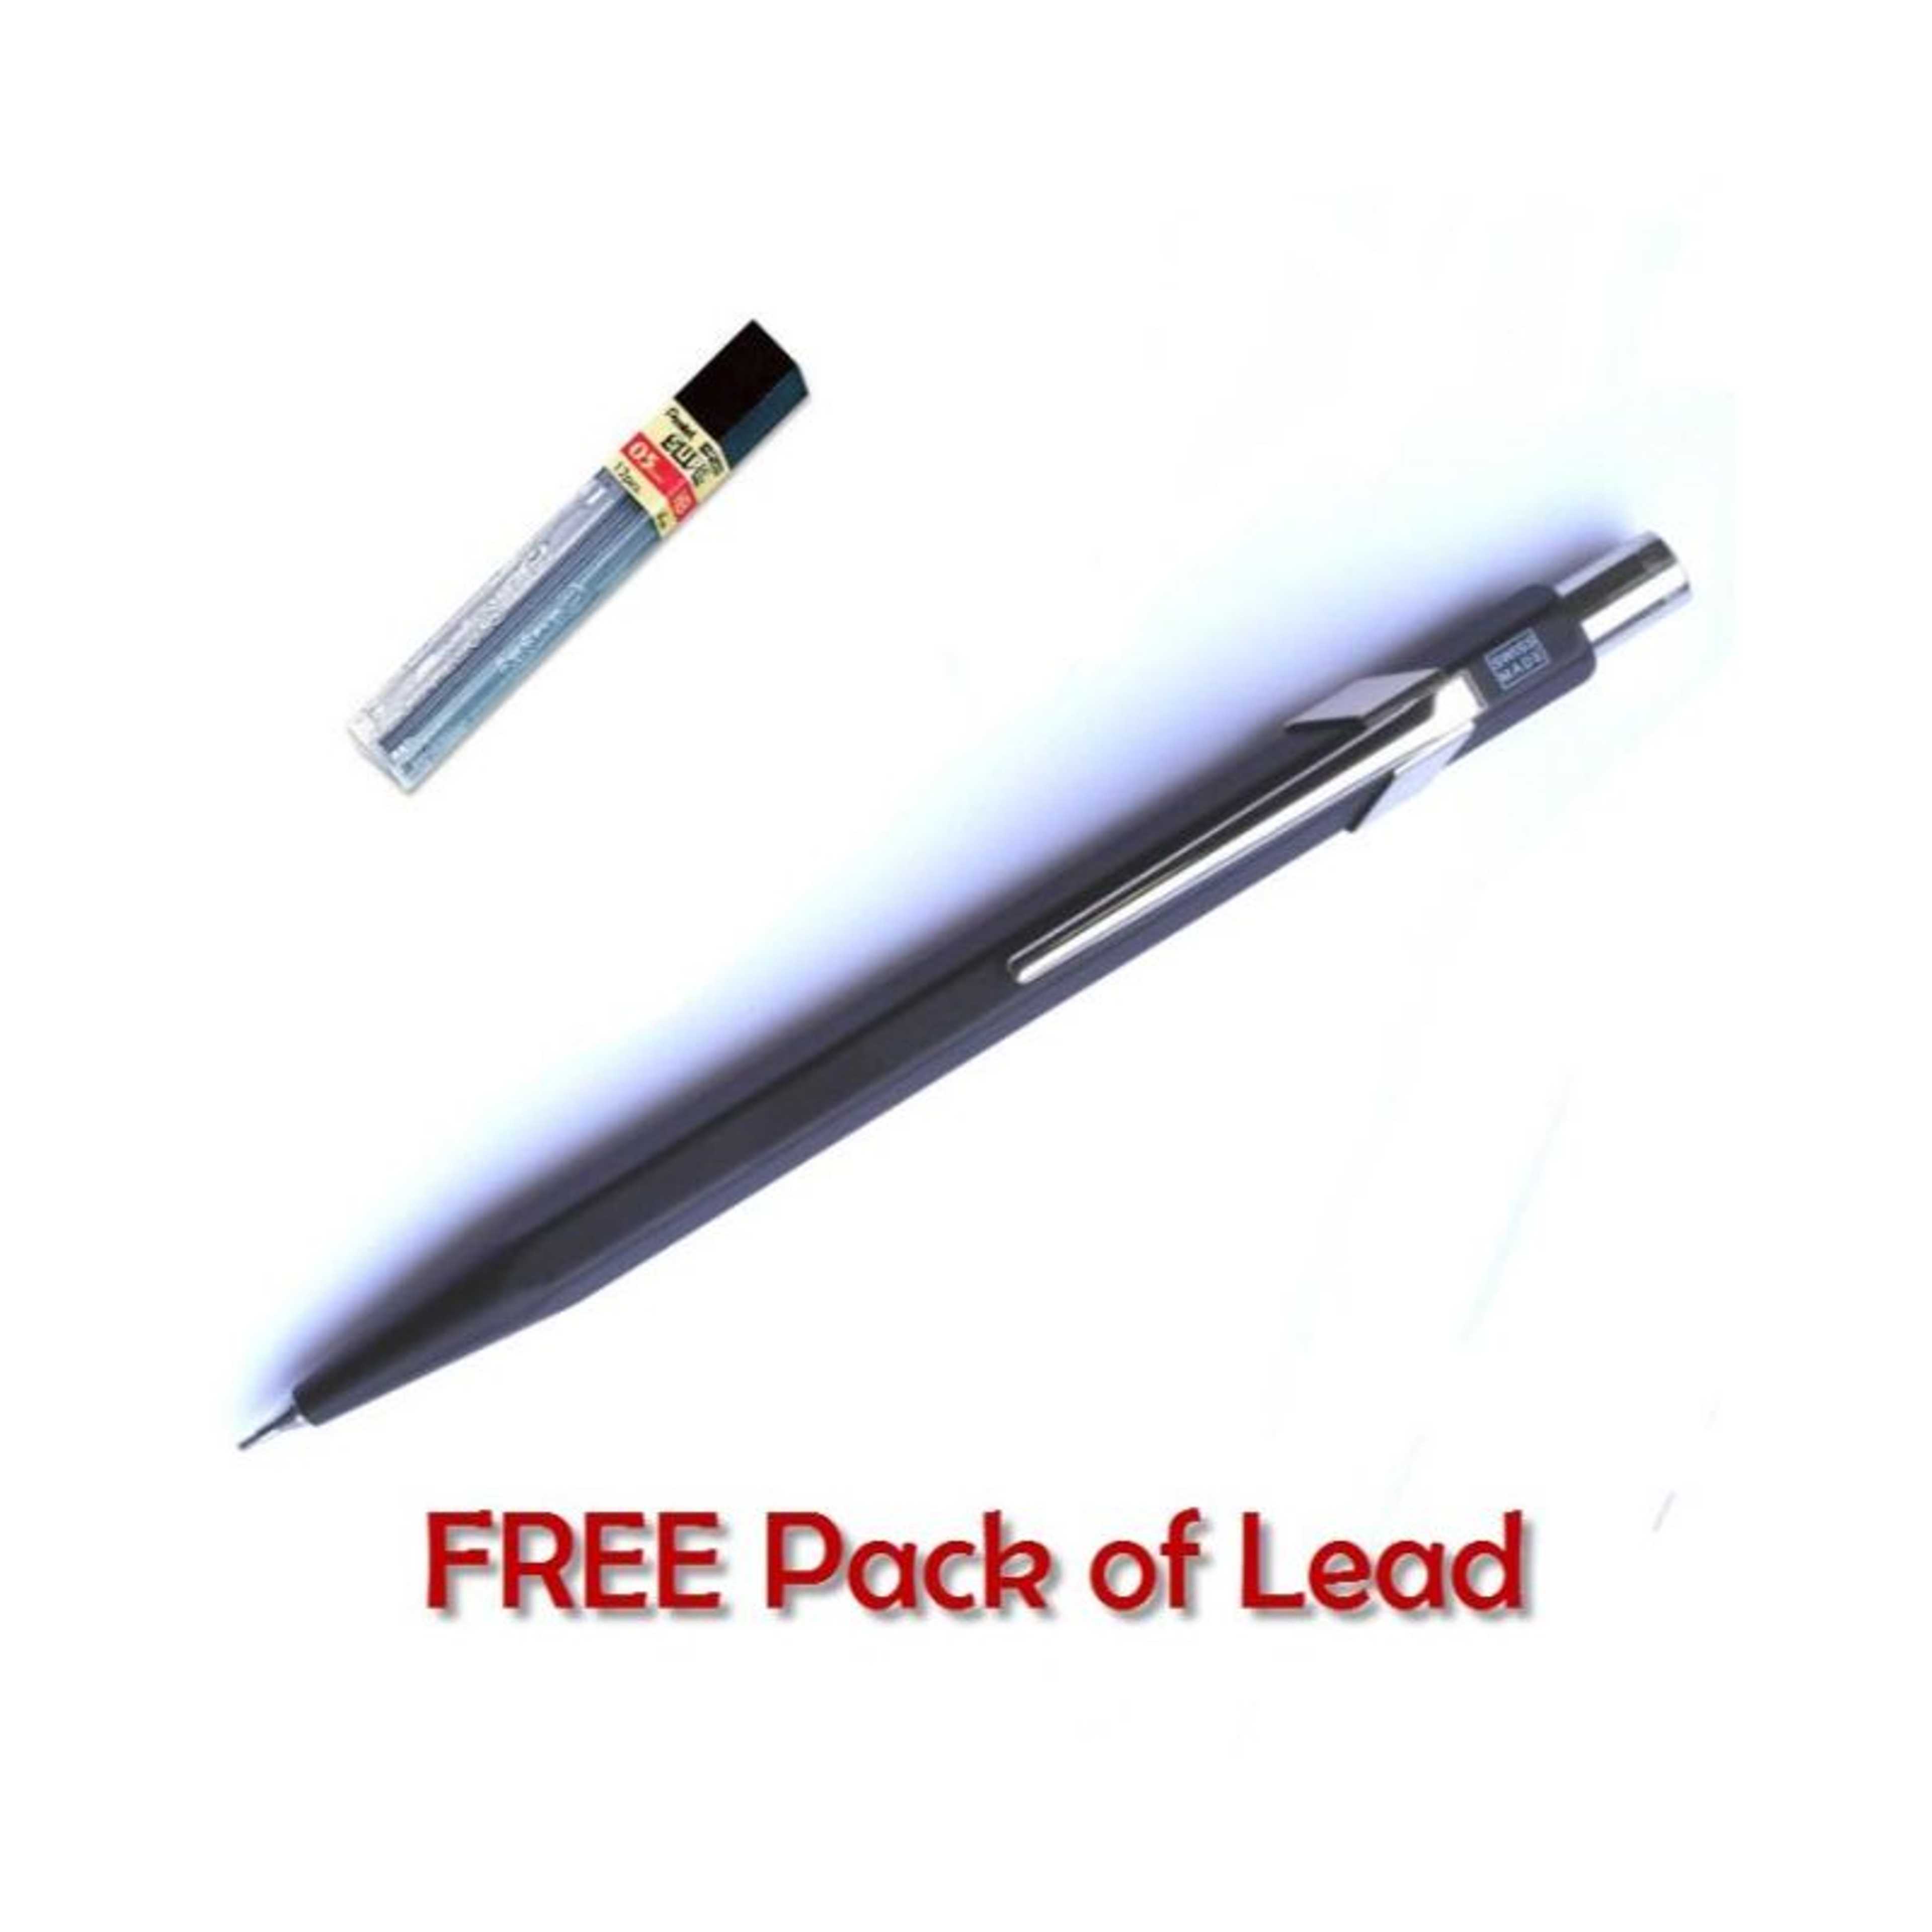 Metall 0.50 mm Pencil with FREE Leadd Refill Pack